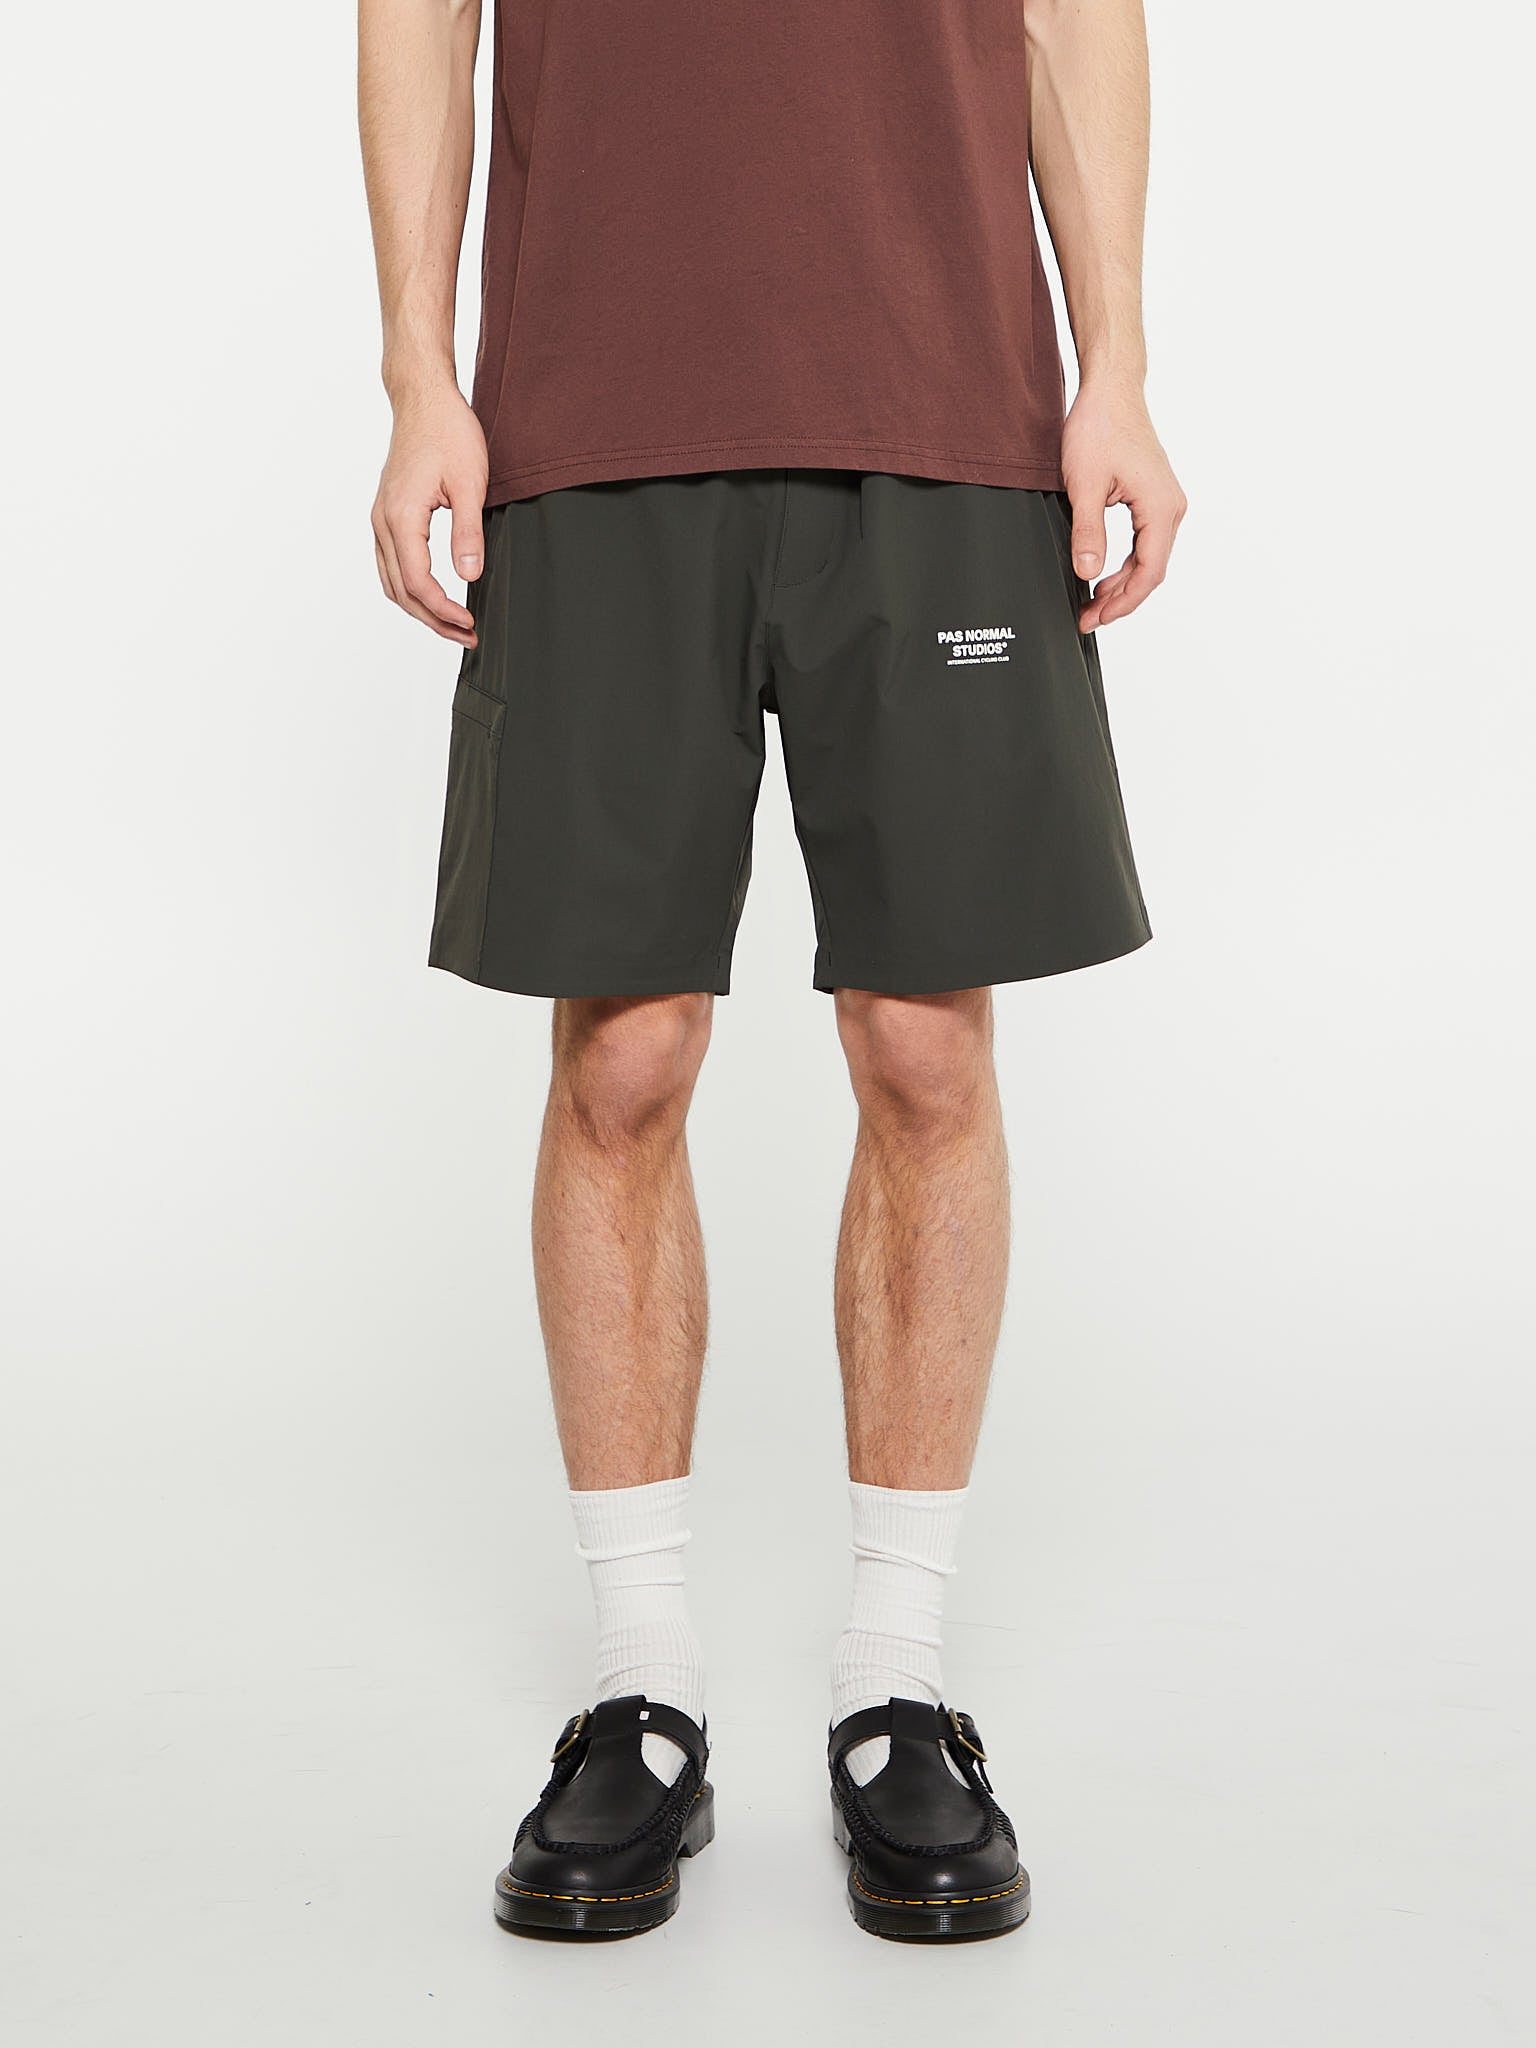 Pas Normal Studios - Off-Race Shorts in Green